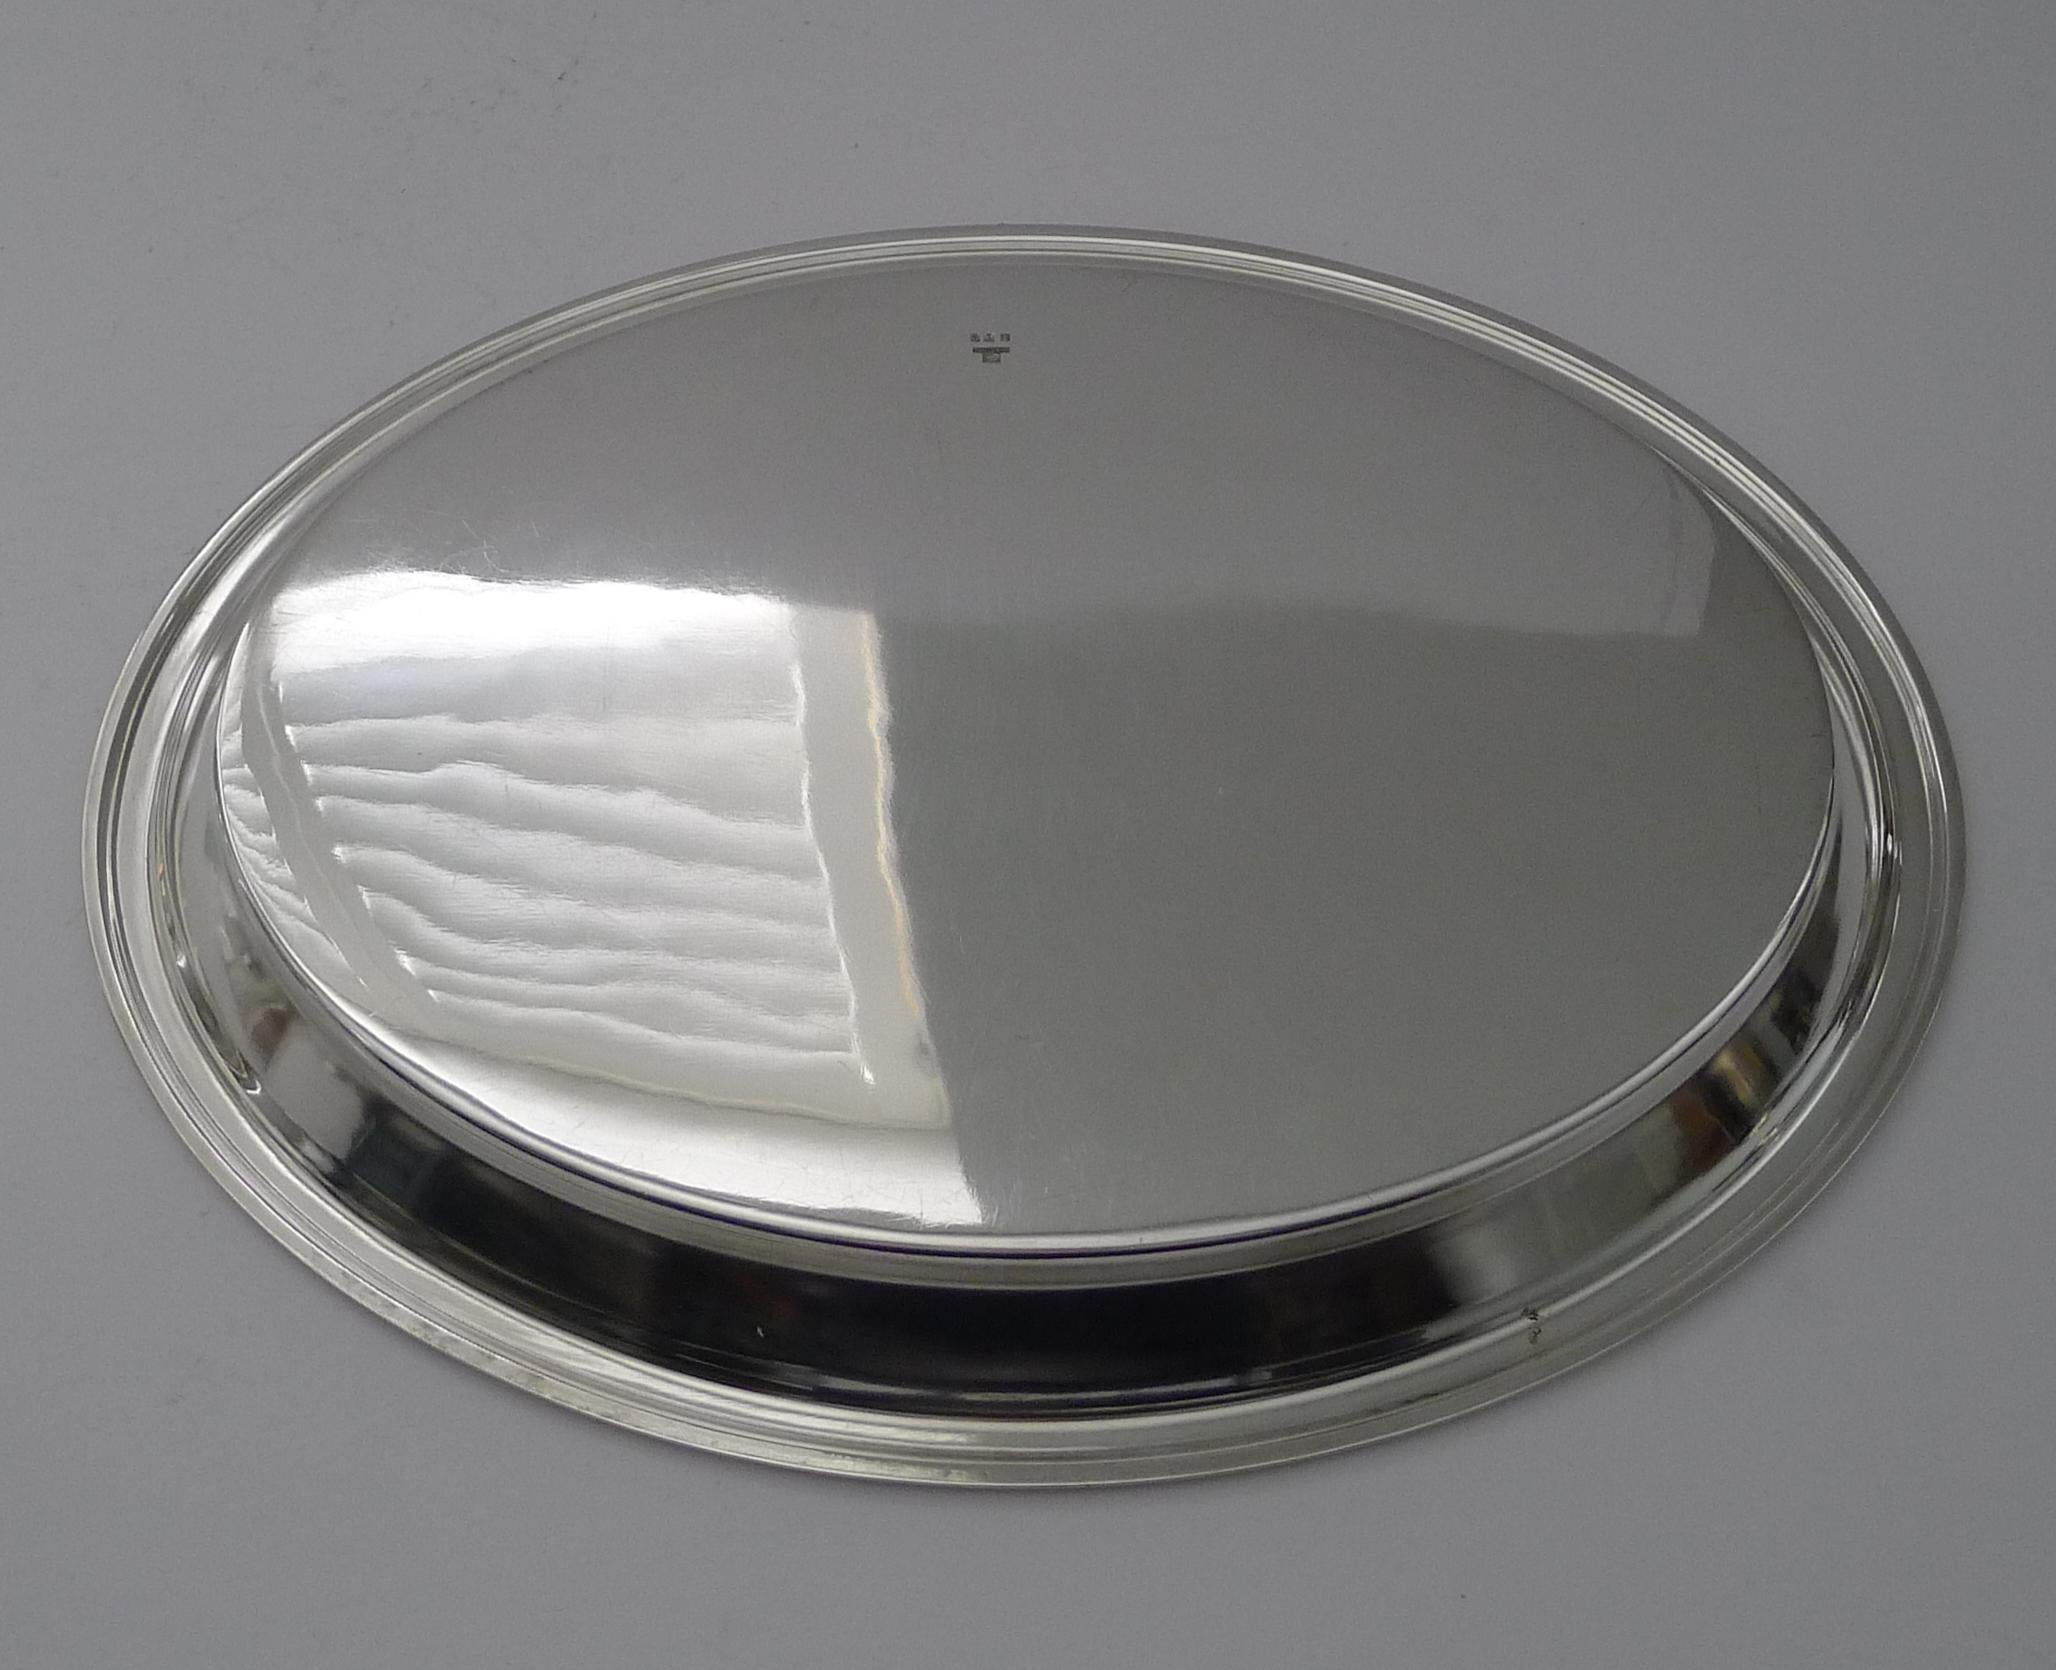 A stylish late Art Deco French cocktail or service tray made from silver plate by the creme de la creme of French silversmith's, Christofle of Paris, fully marked on the underside.

The oval tray has been professionally cleaned and polished in our